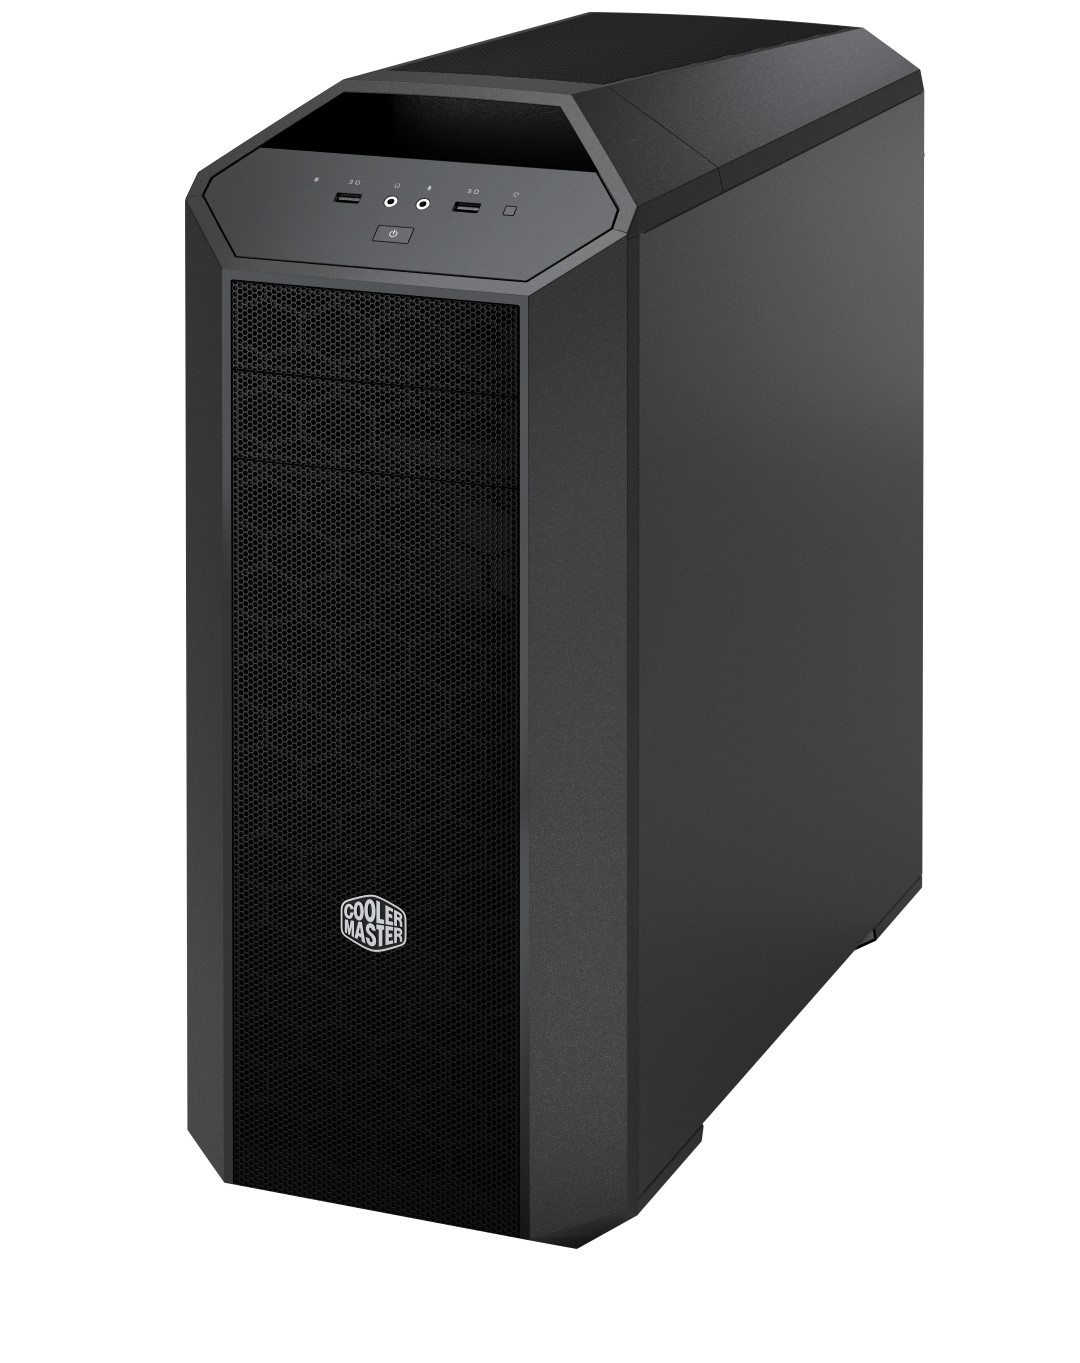 Cooler Master MasterCase 5 available on this 20th August 26